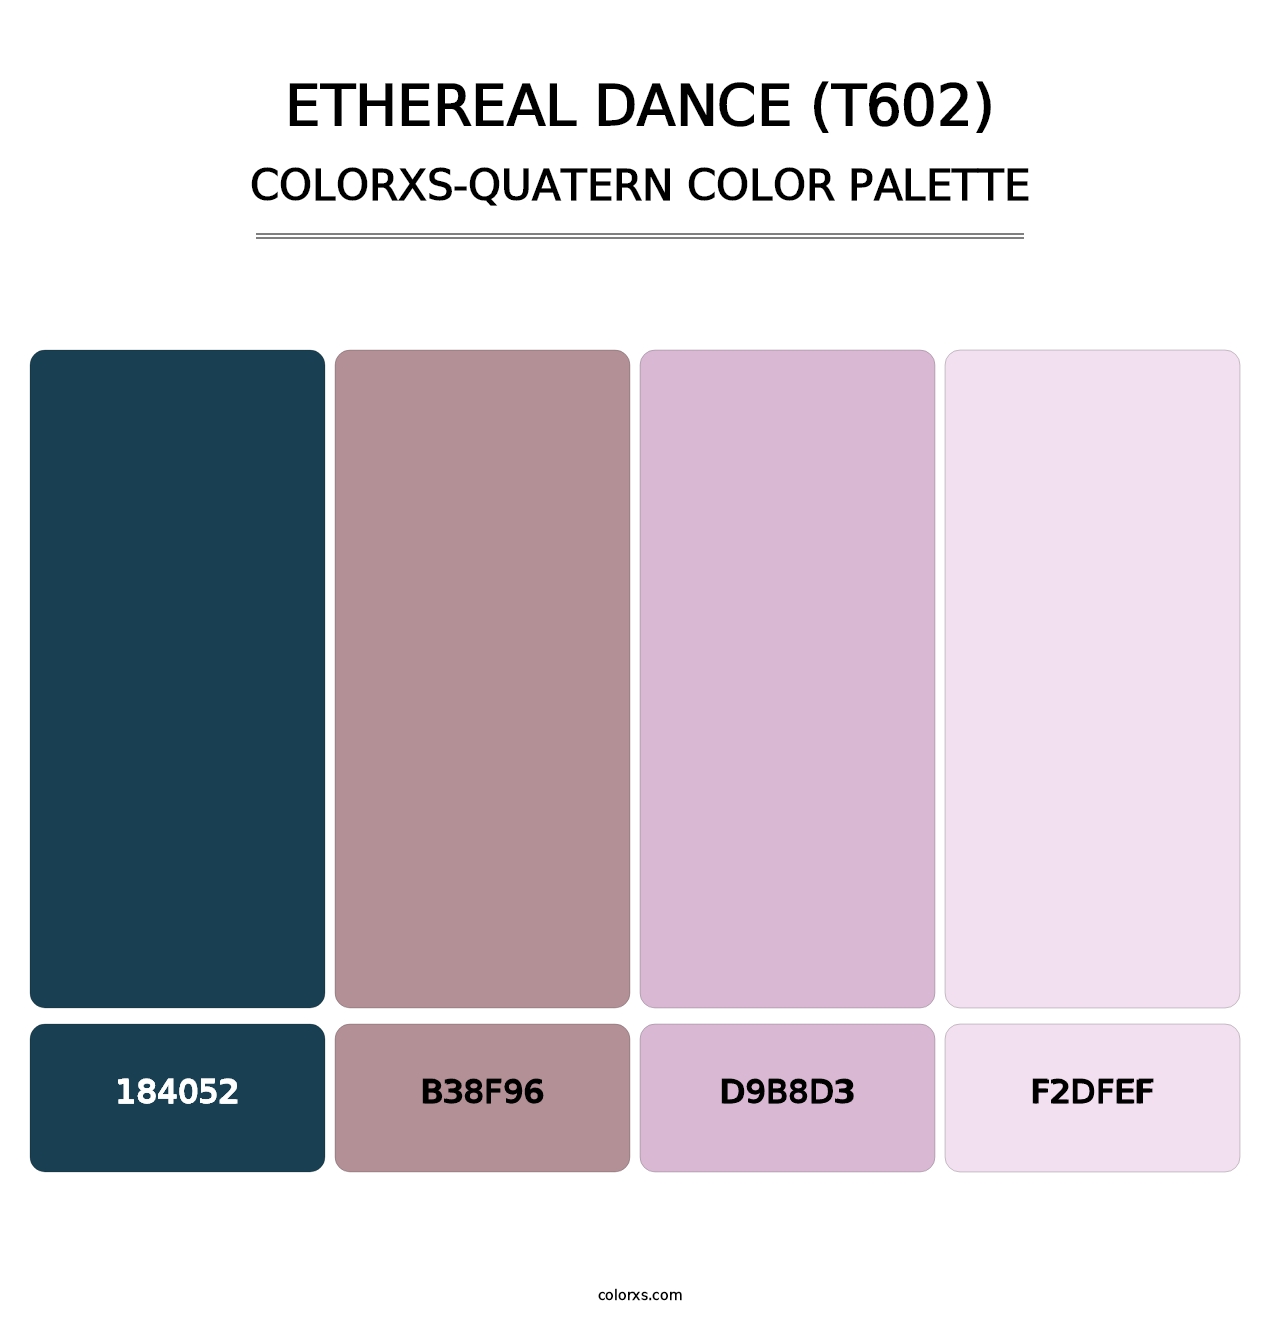 Ethereal Dance (T602) - Colorxs Quatern Palette